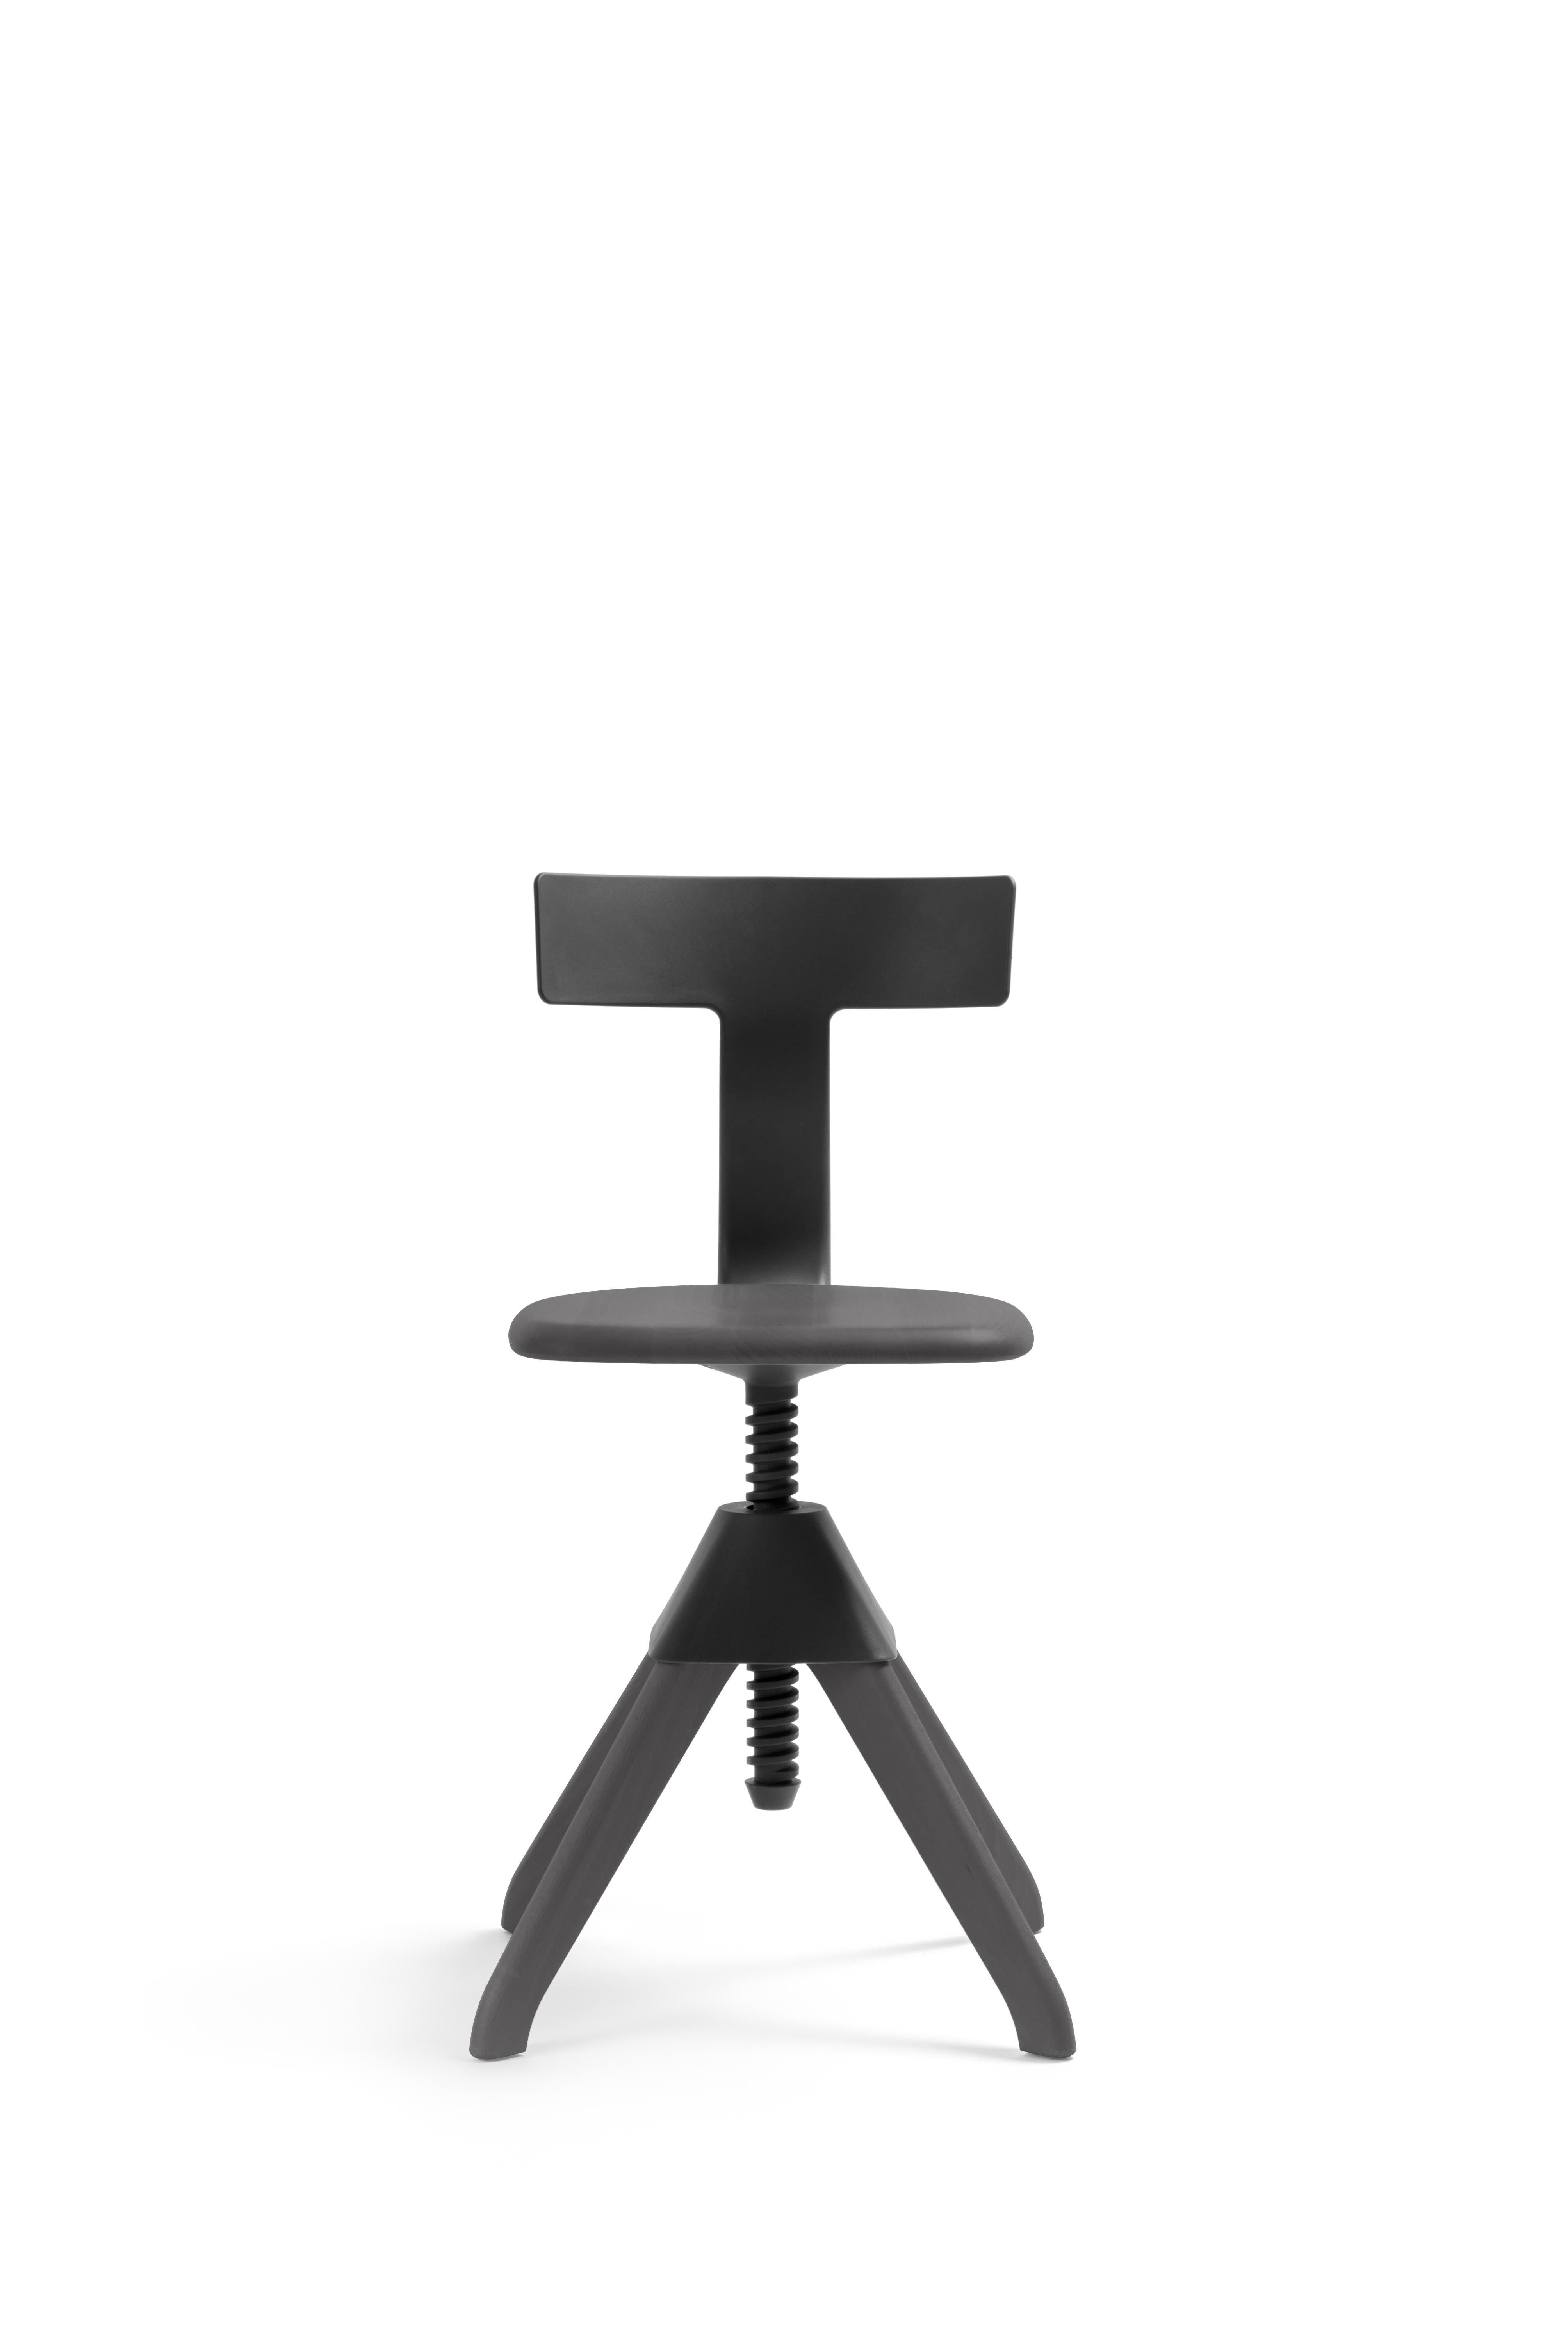 Tuffy by Konstantin Grcic for MAGIS For Sale 1